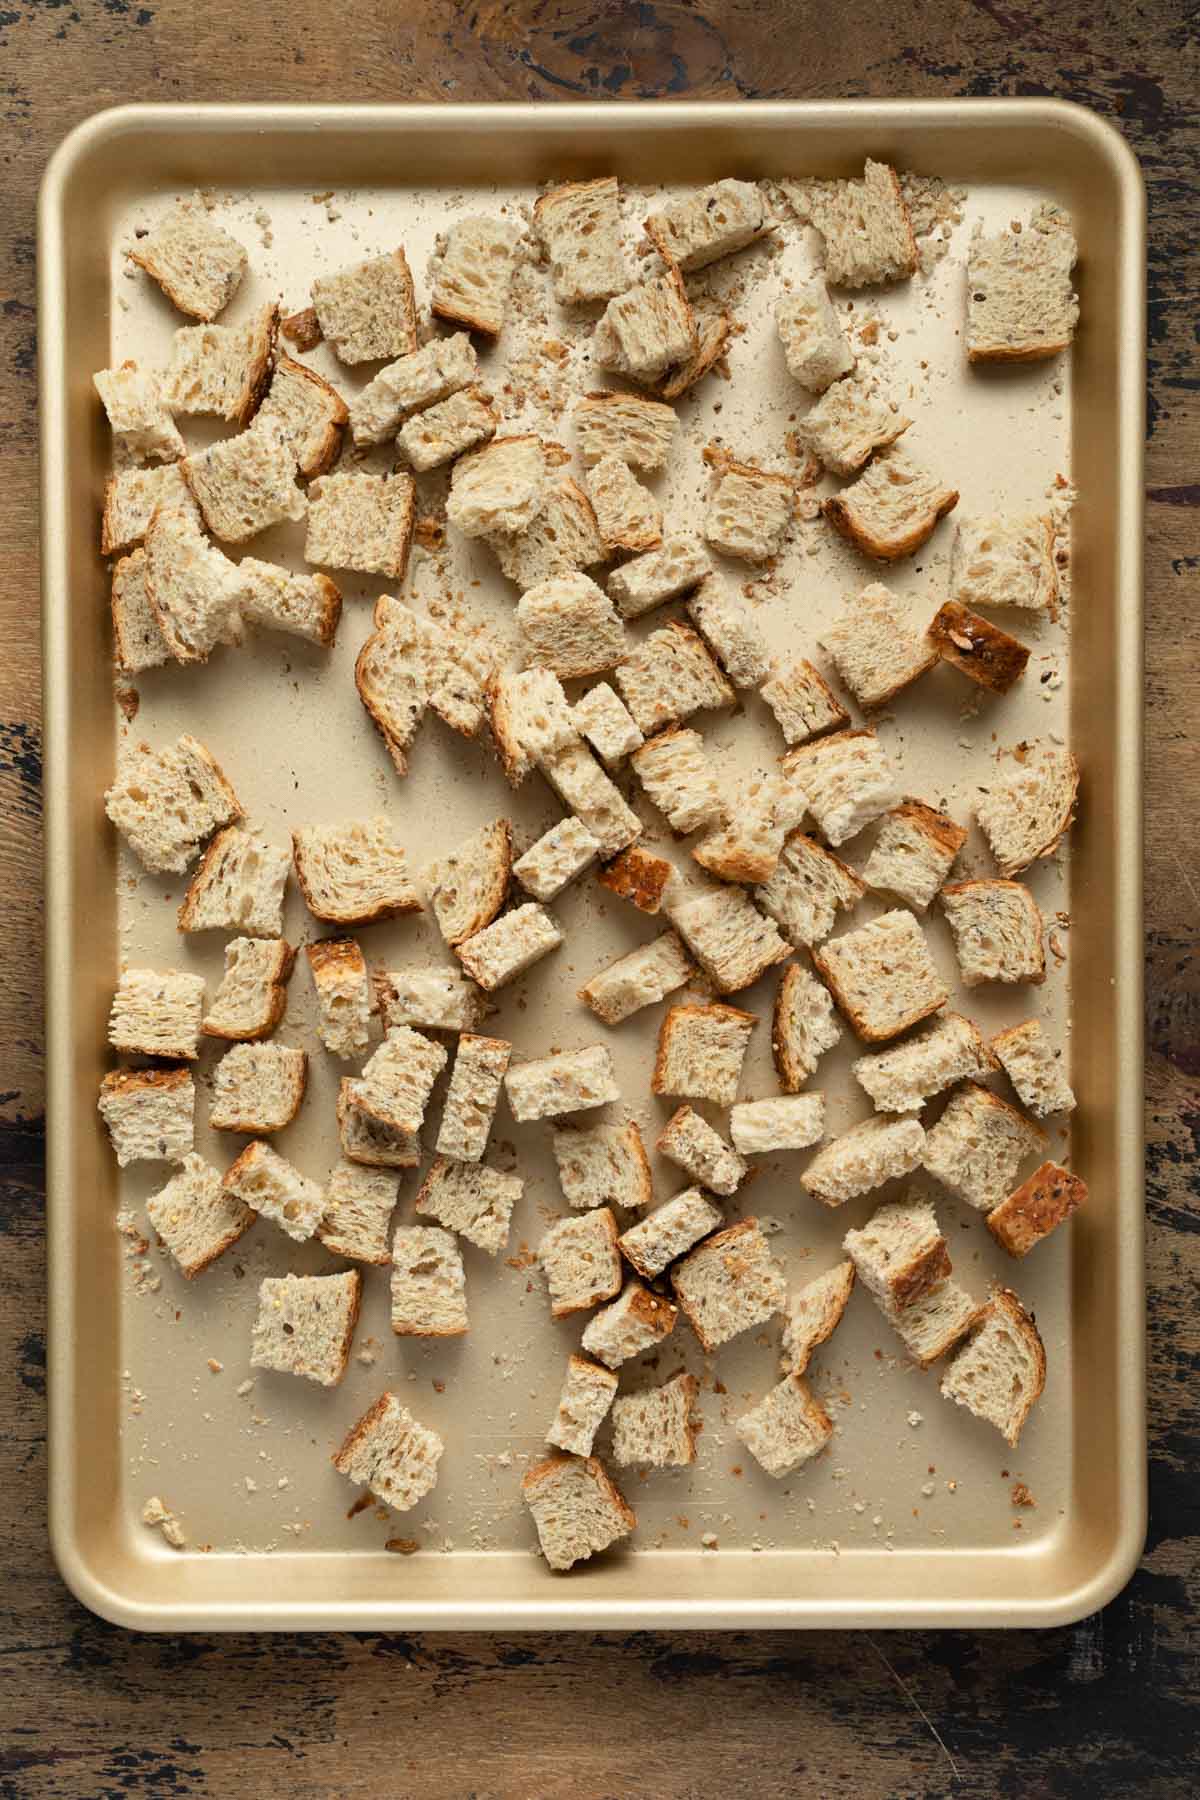 Bread cubes arranged in a single layer on a baking sheet.